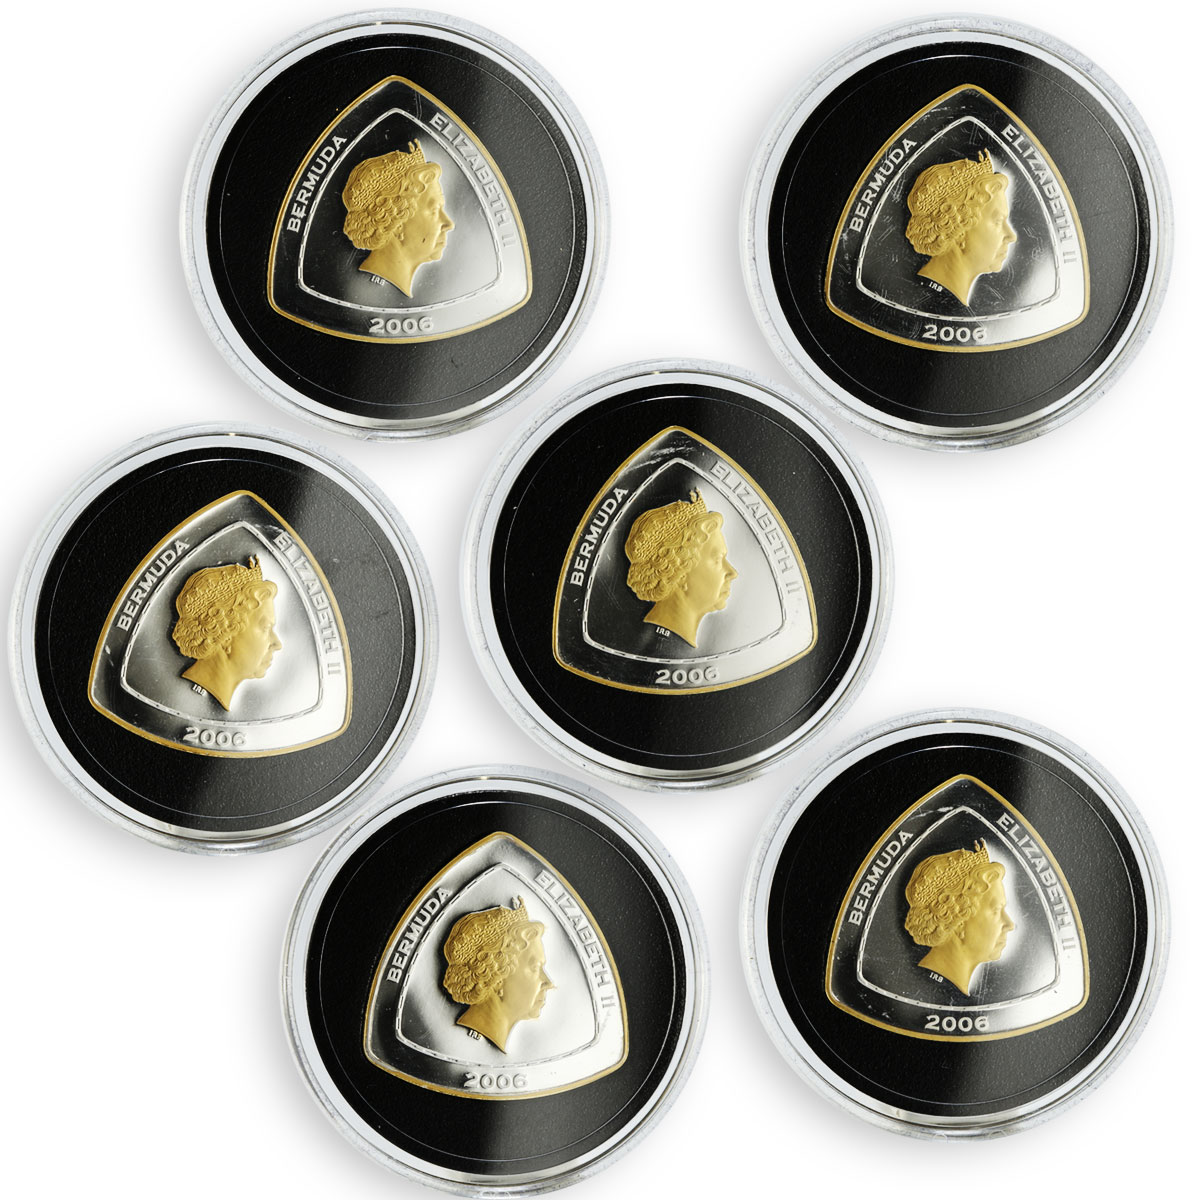 Bermuda set 6 coins Shipwreck Series proof gilded silver 2006